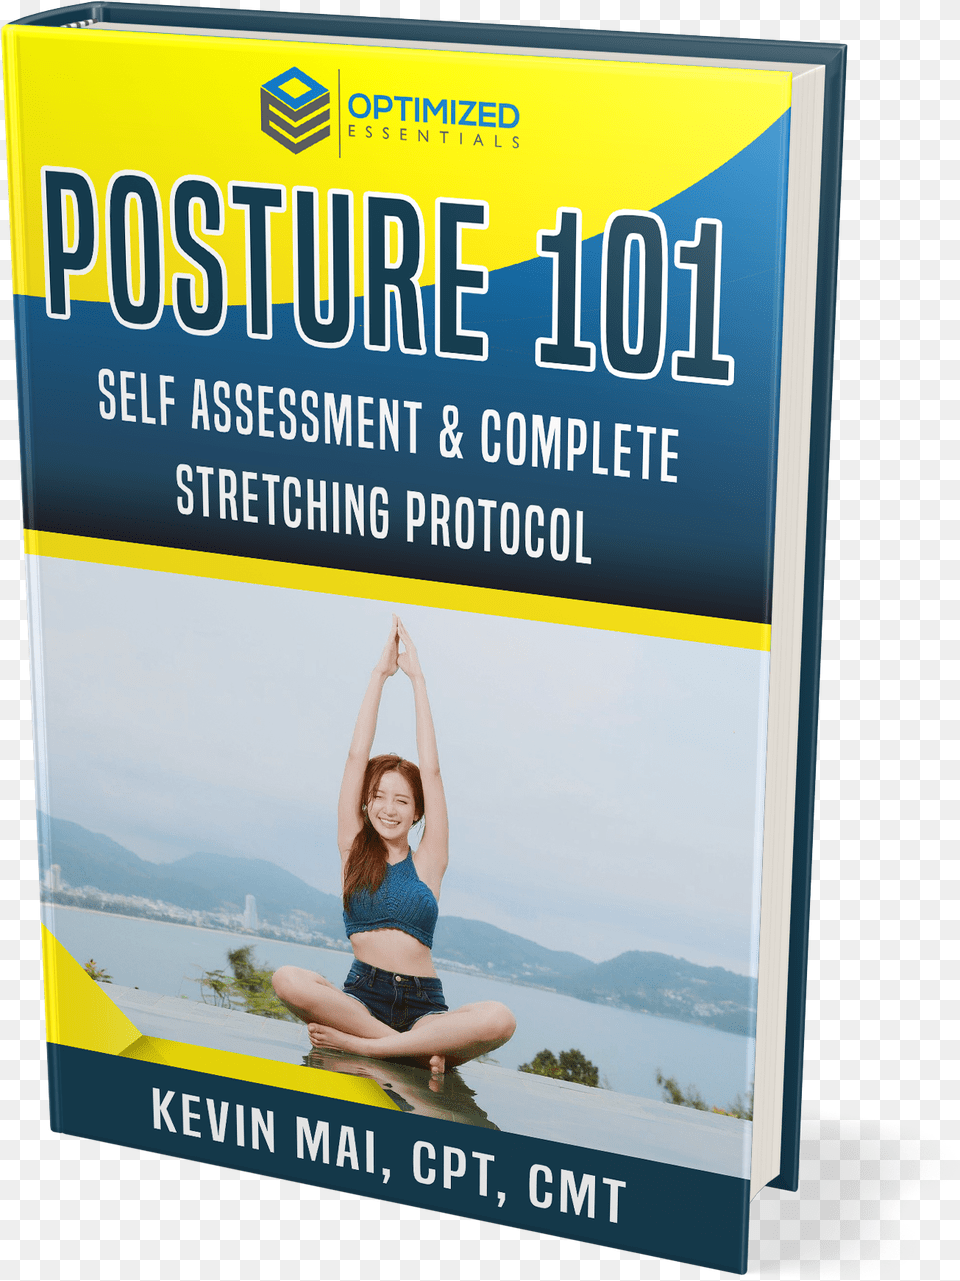 Self Assessment And Stretching Protocol Flyer, Advertisement, Female, Teen, Girl Png Image